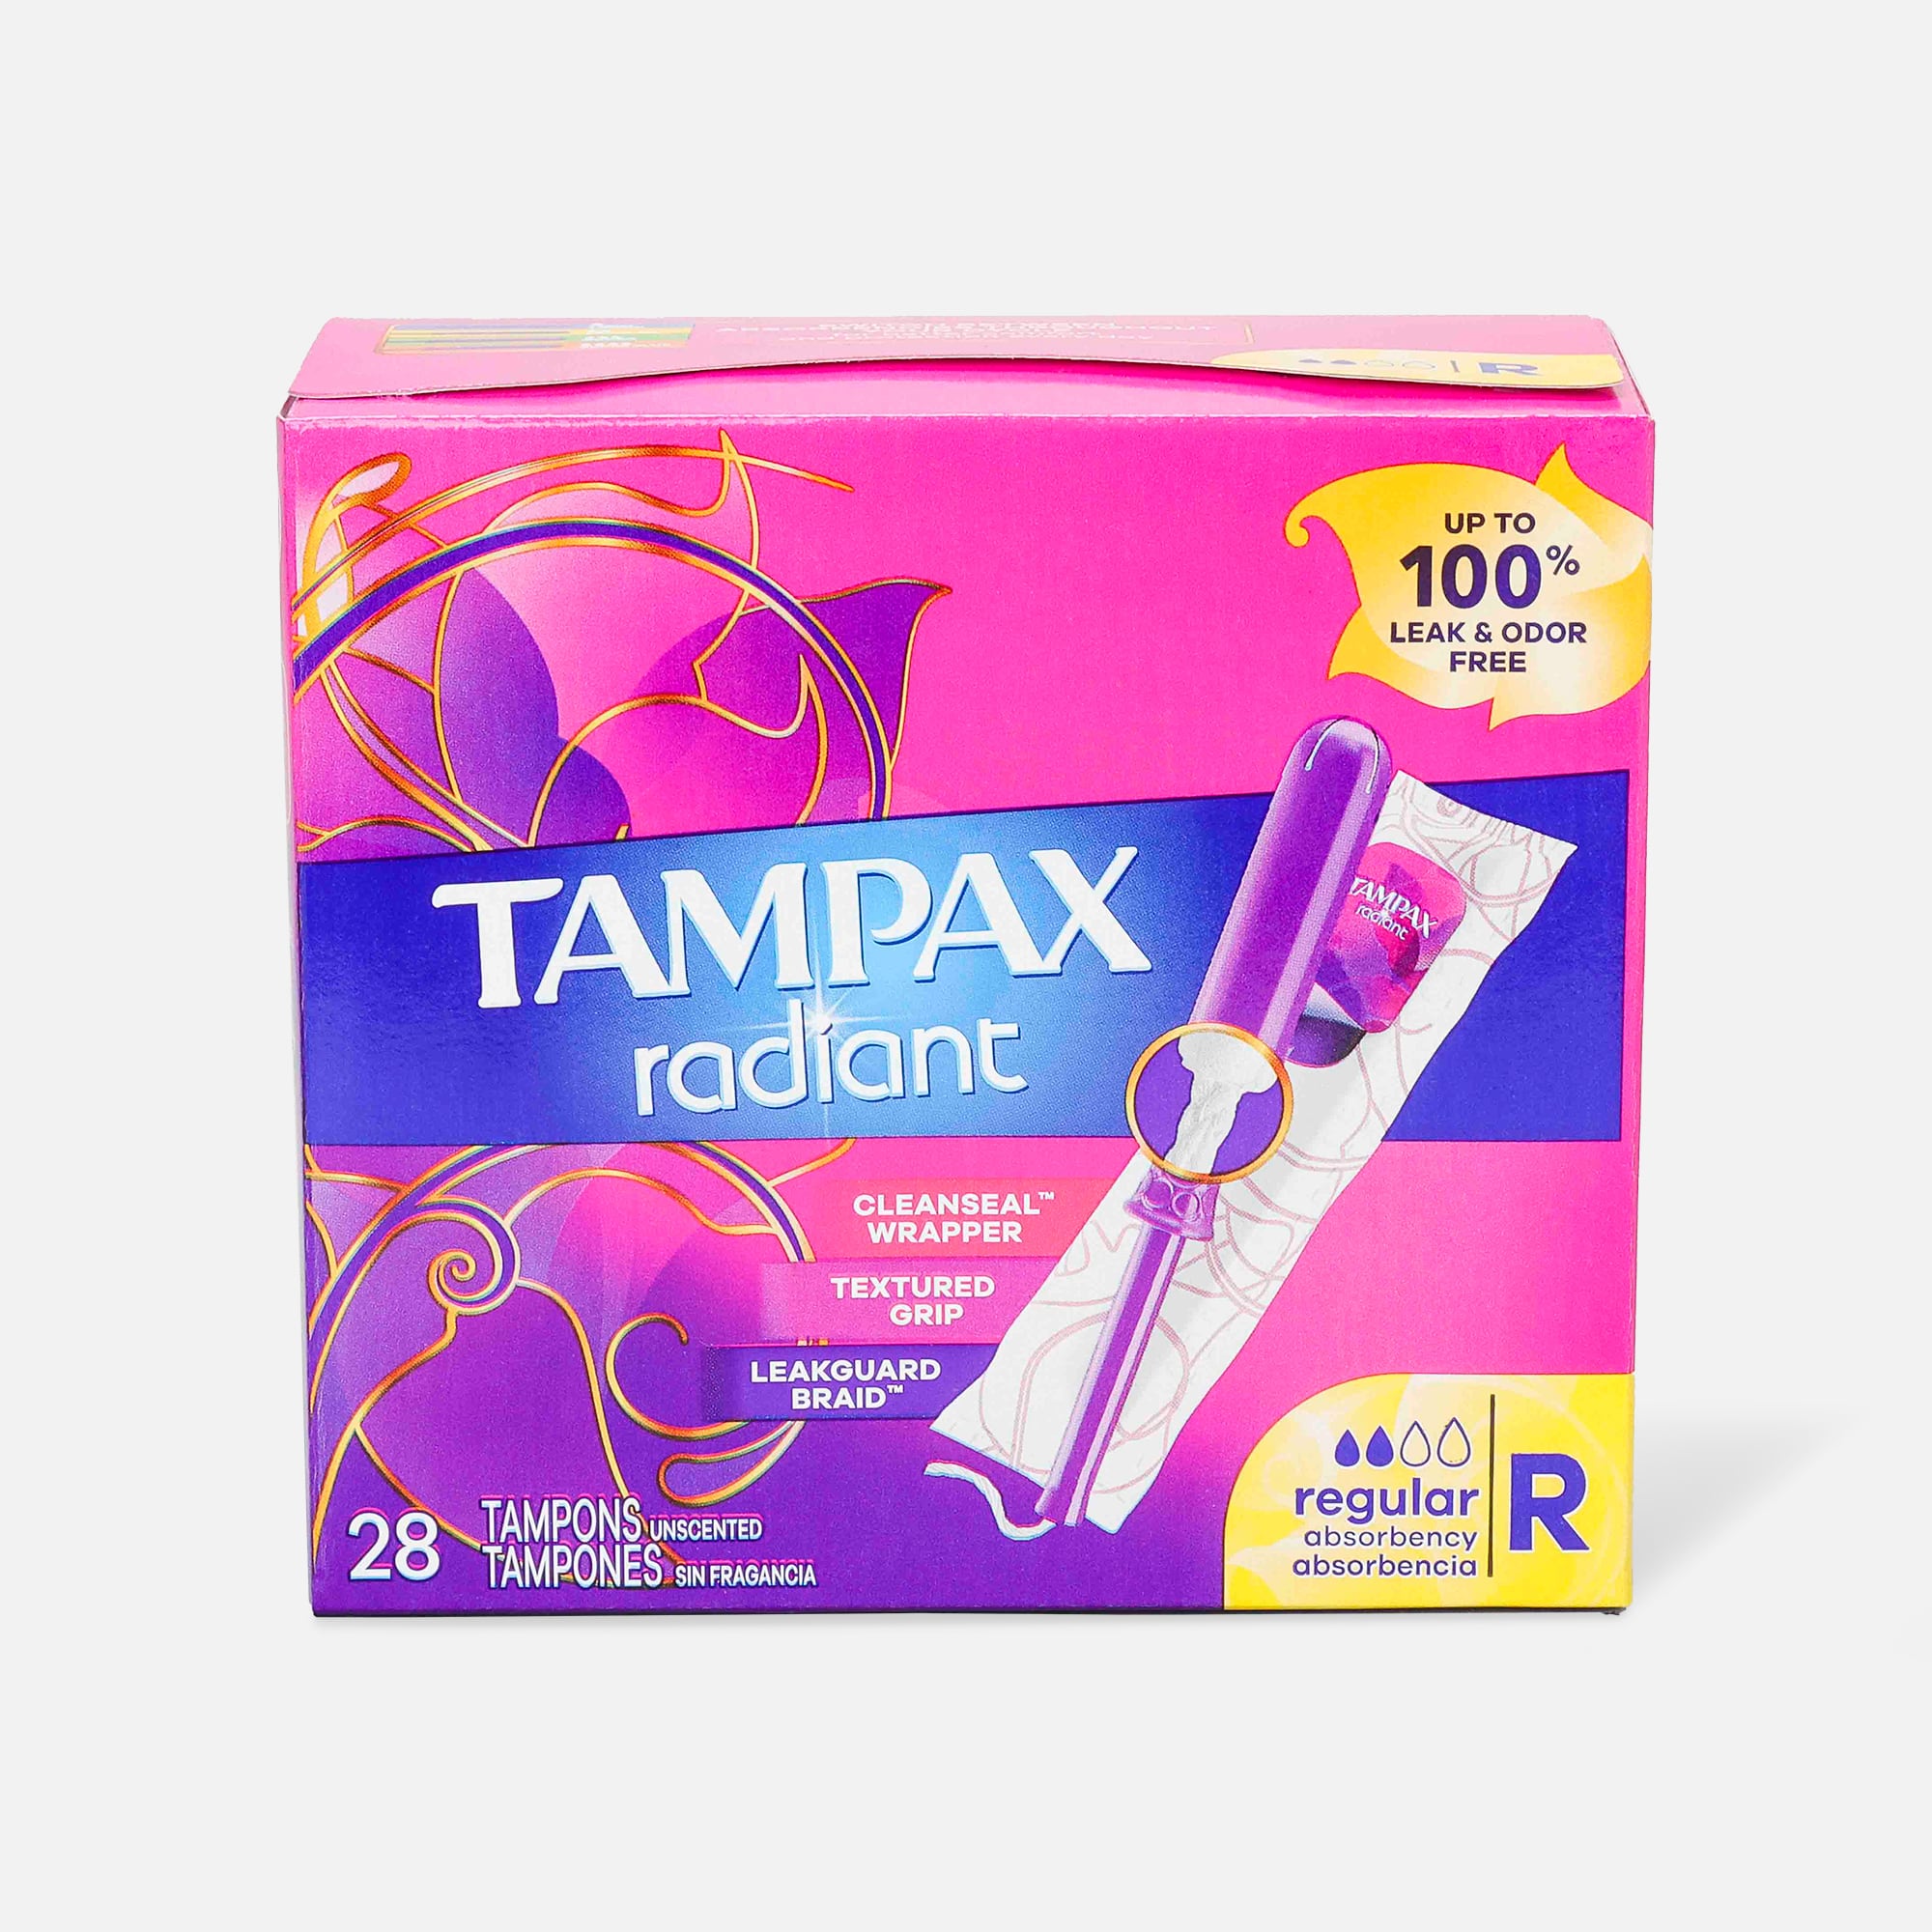 Tampax Radiant Super Plus Absorbency Tampons, Unscented, 28 ct